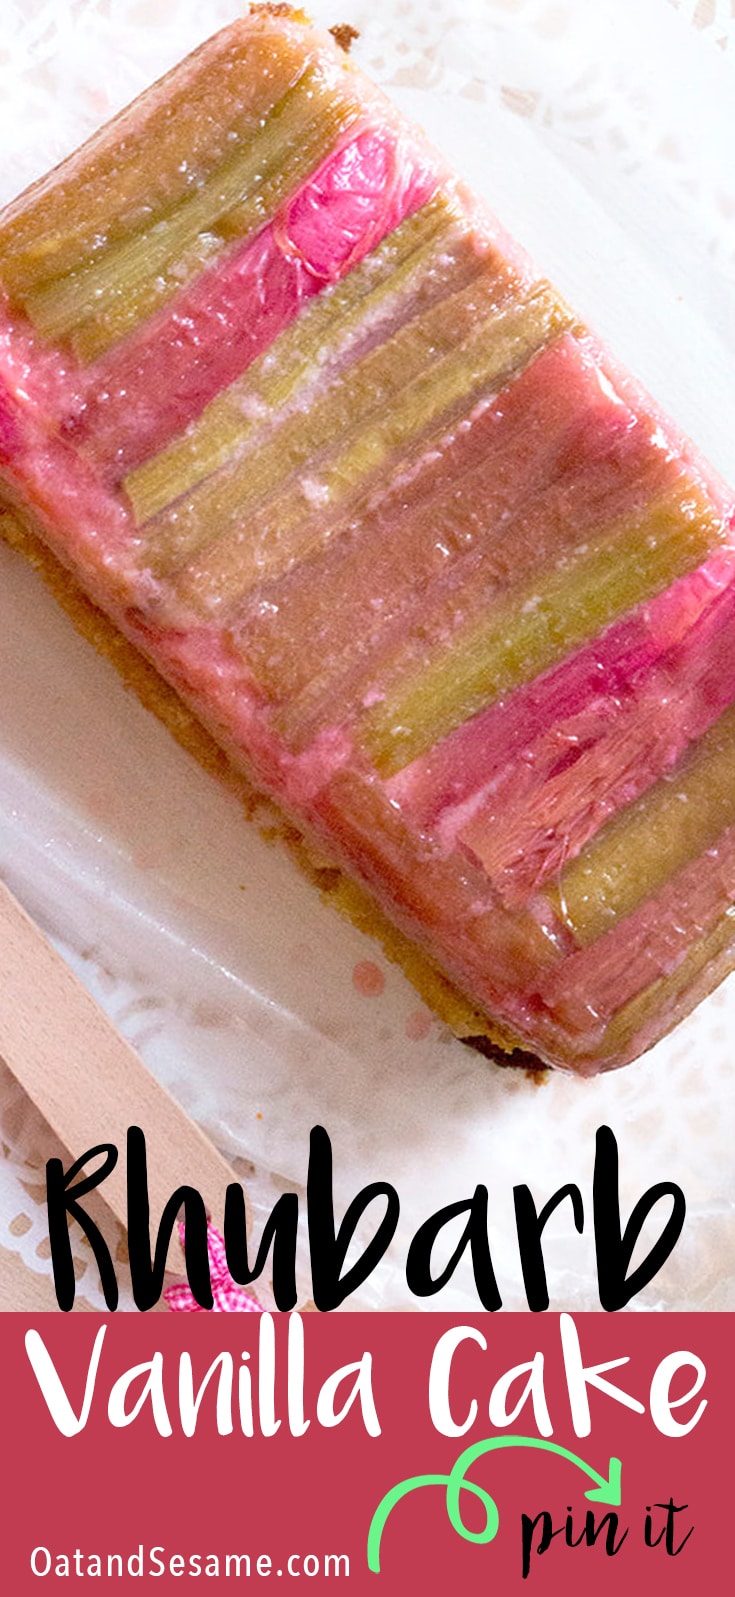 A Norwegian recipe for Rhubarb Vanilla Bean Cake that's similar to an upside down cake. Super rich and delicious! A family favorite! | #RHUBARB | #CAKE | #BAKING | #Recipes at OatandSesame.com